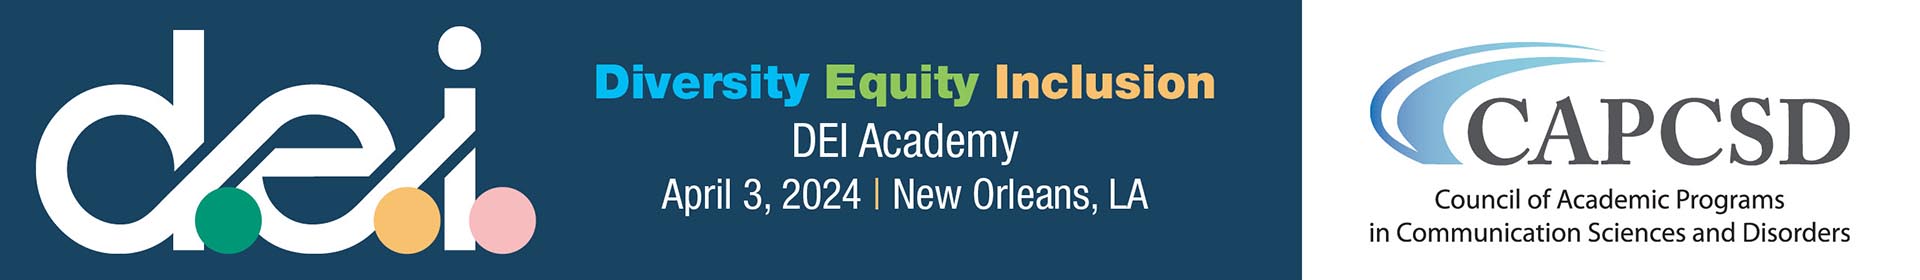 CAPCSD Diversity Equity Inclusion Academy banner, April 3, 2024 in New Orleans, LA